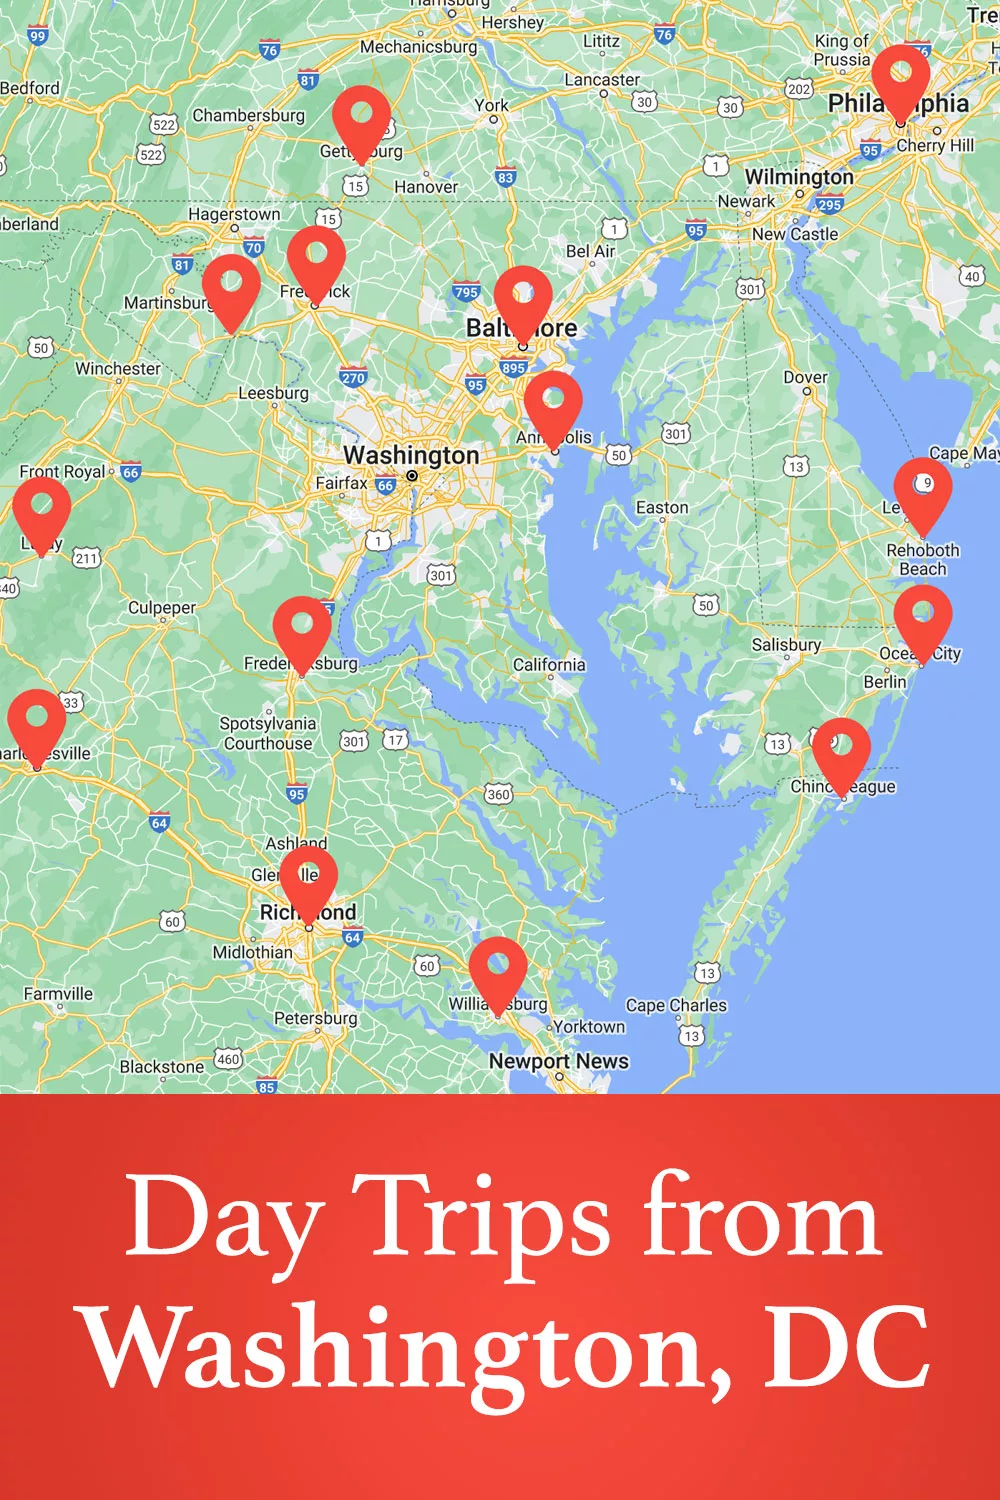 Day Trips from Washington, DC